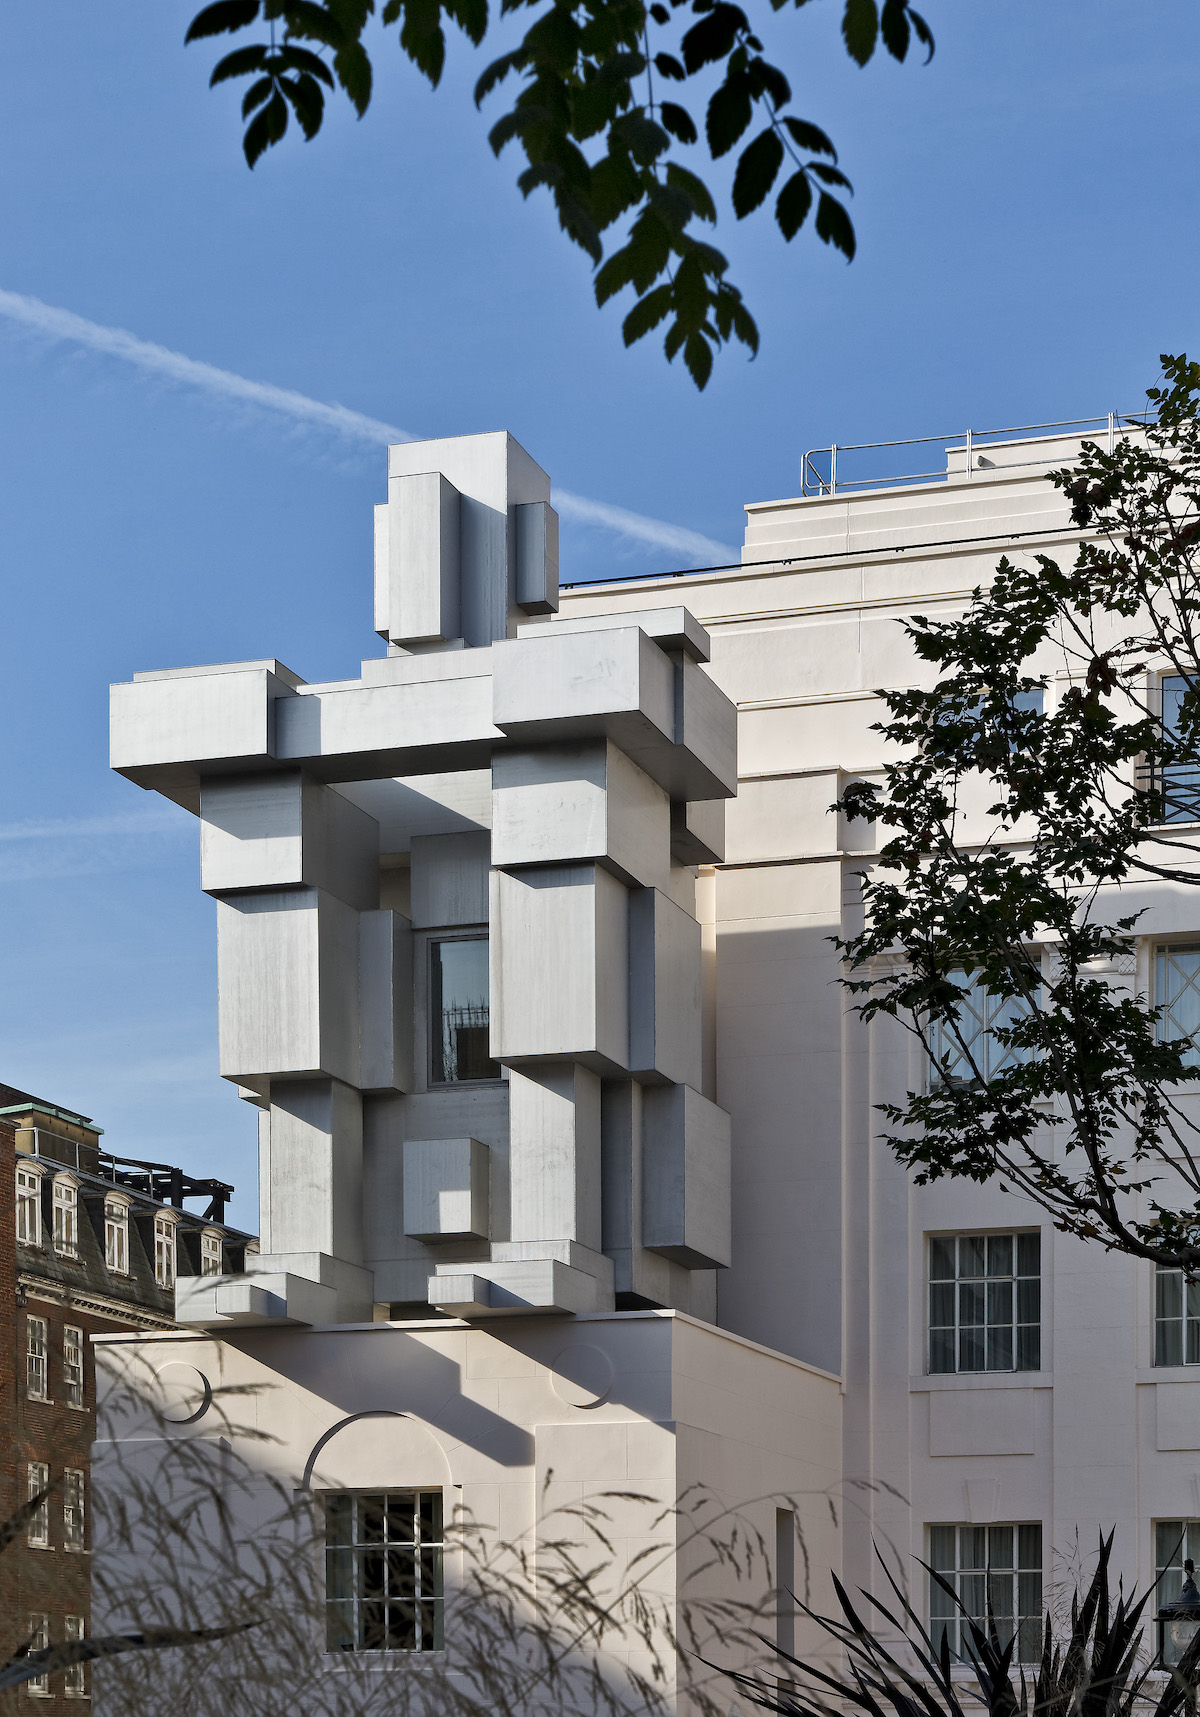 A structure of a robot on the side of the Beaumont Hotel in London's Mayfair neighbourhood. Inside this sculpture is a suite